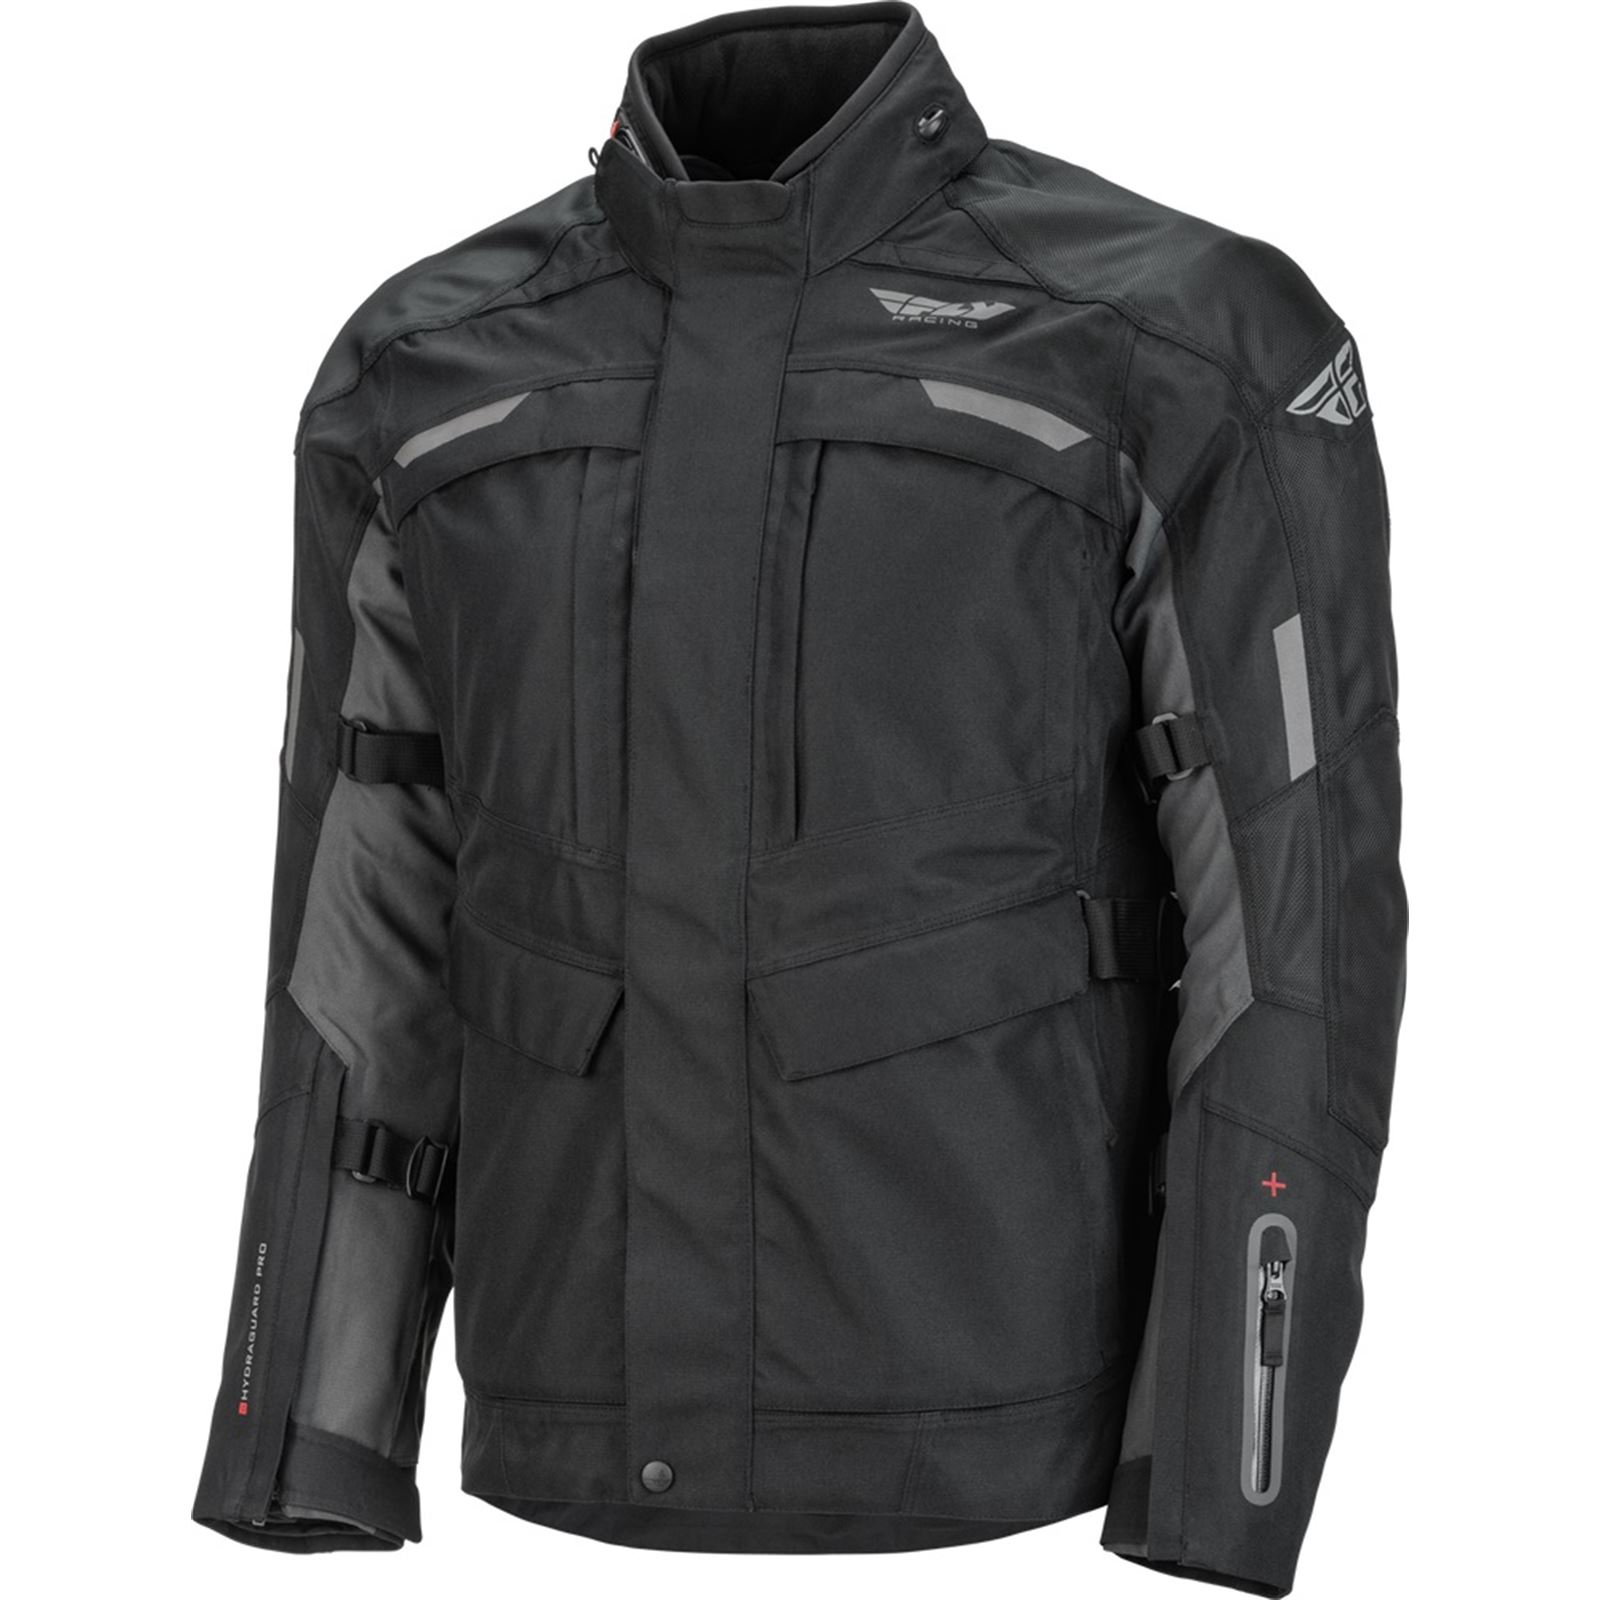 Fly Racing Off Grid Jacket - Black - 2X-Large Tall